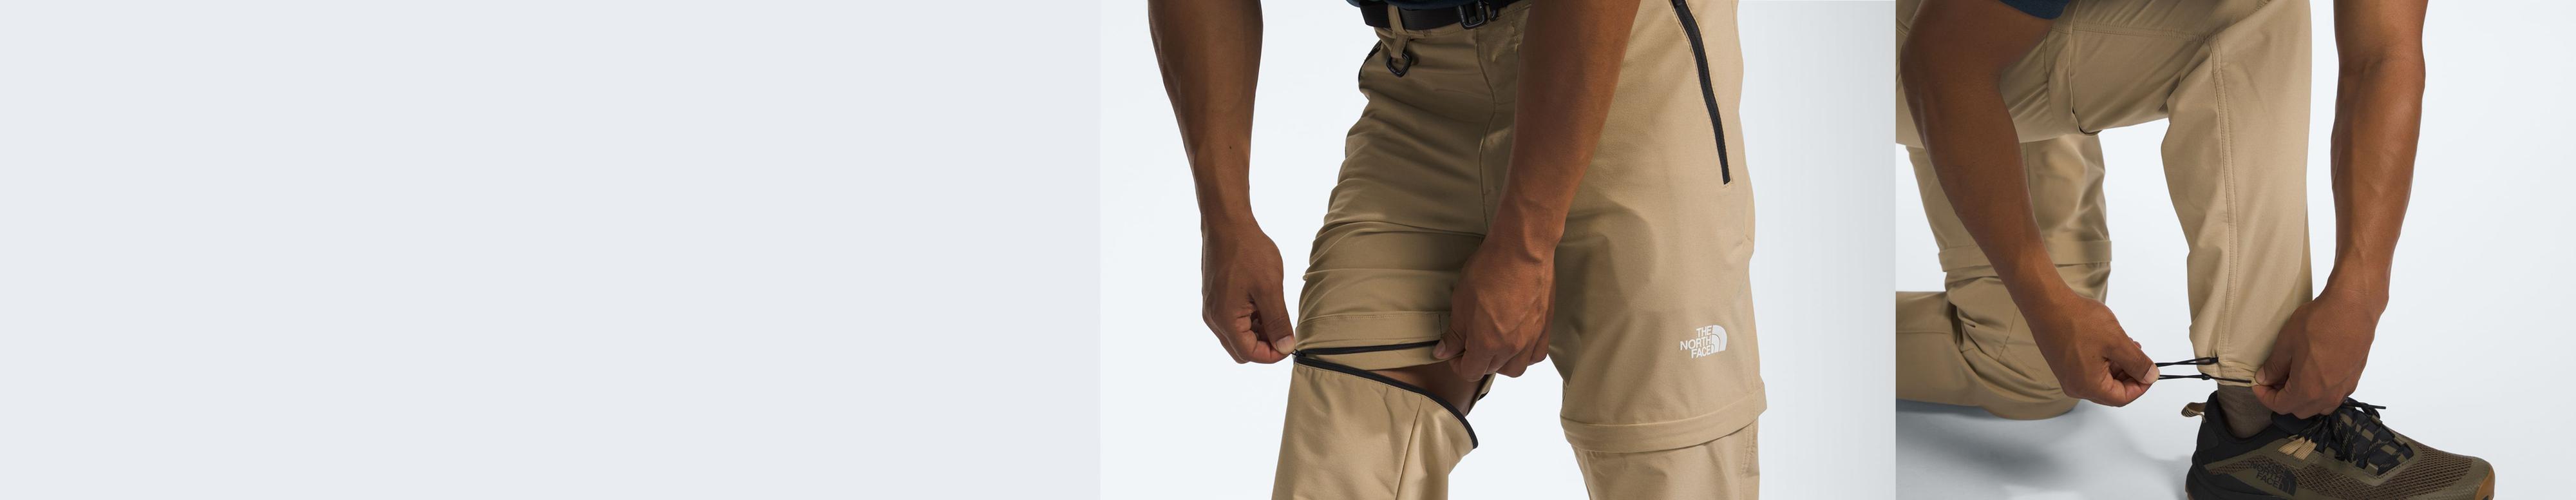 A split image showing the adjustability and zip-off functionality of the Paramount Pro Convertible Pants.